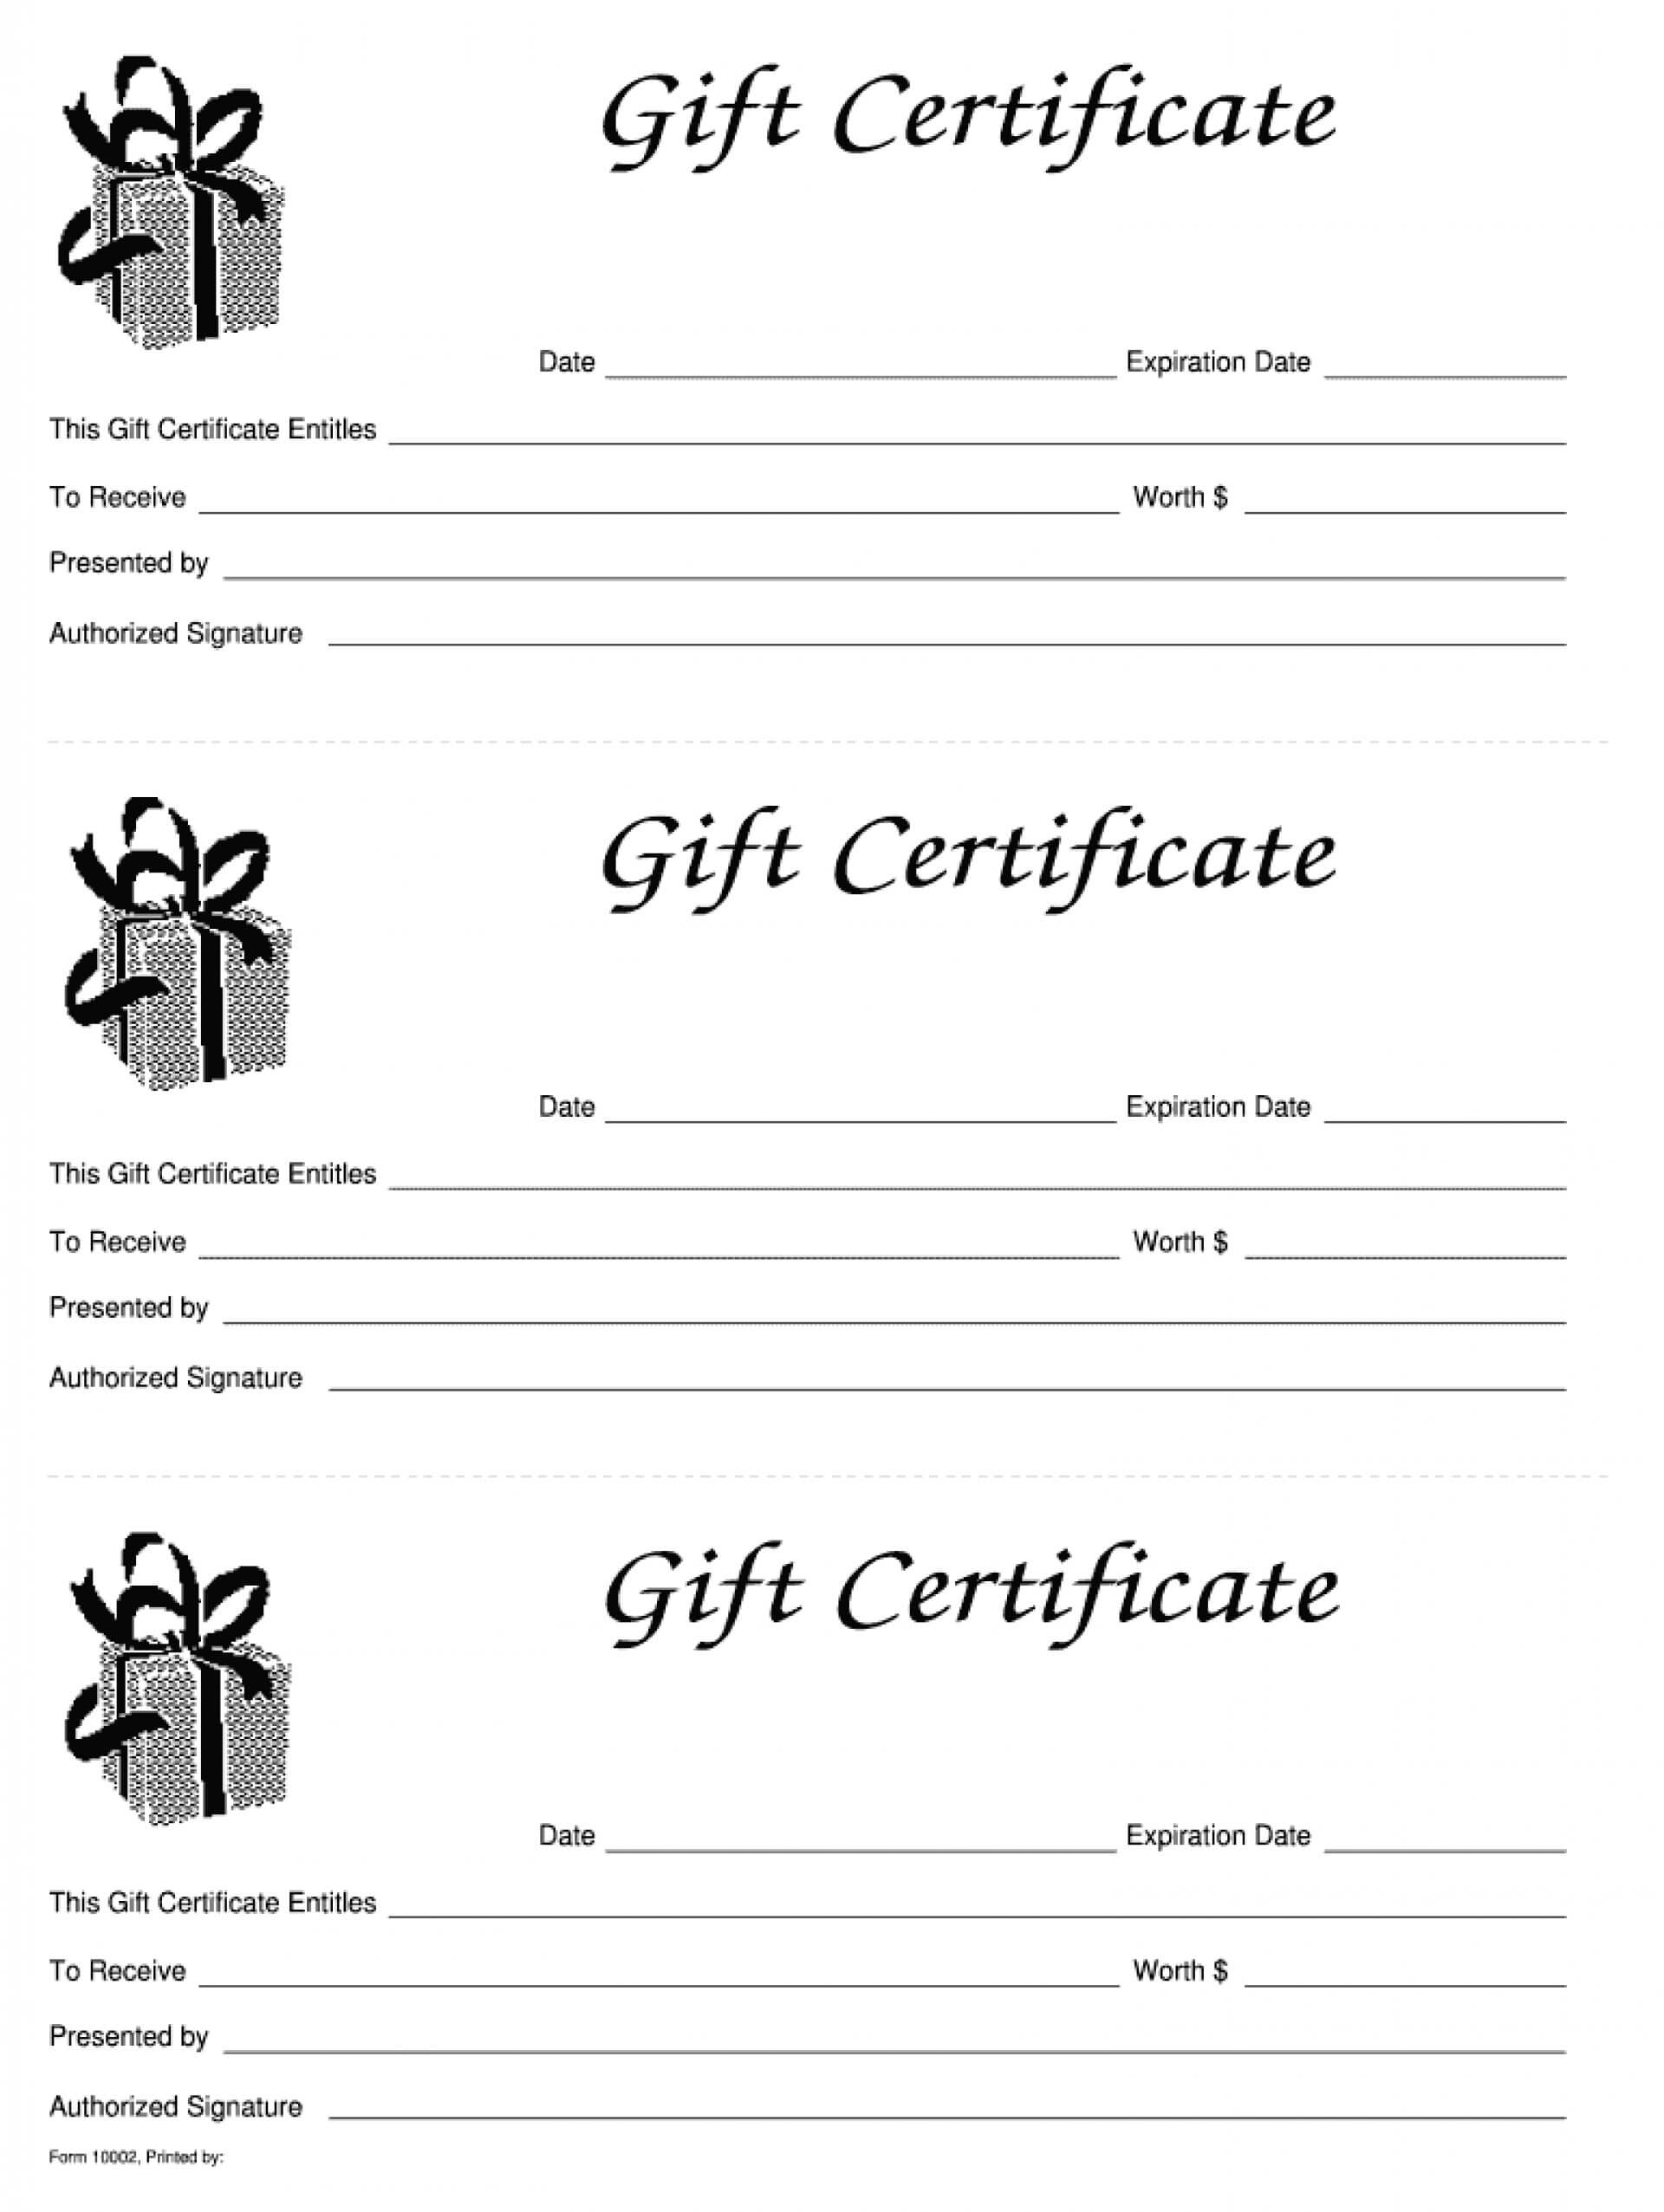 001 Free Printable Gift Certificates Template Ideas Bday Intended For Printable Gift Certificates Templates Free